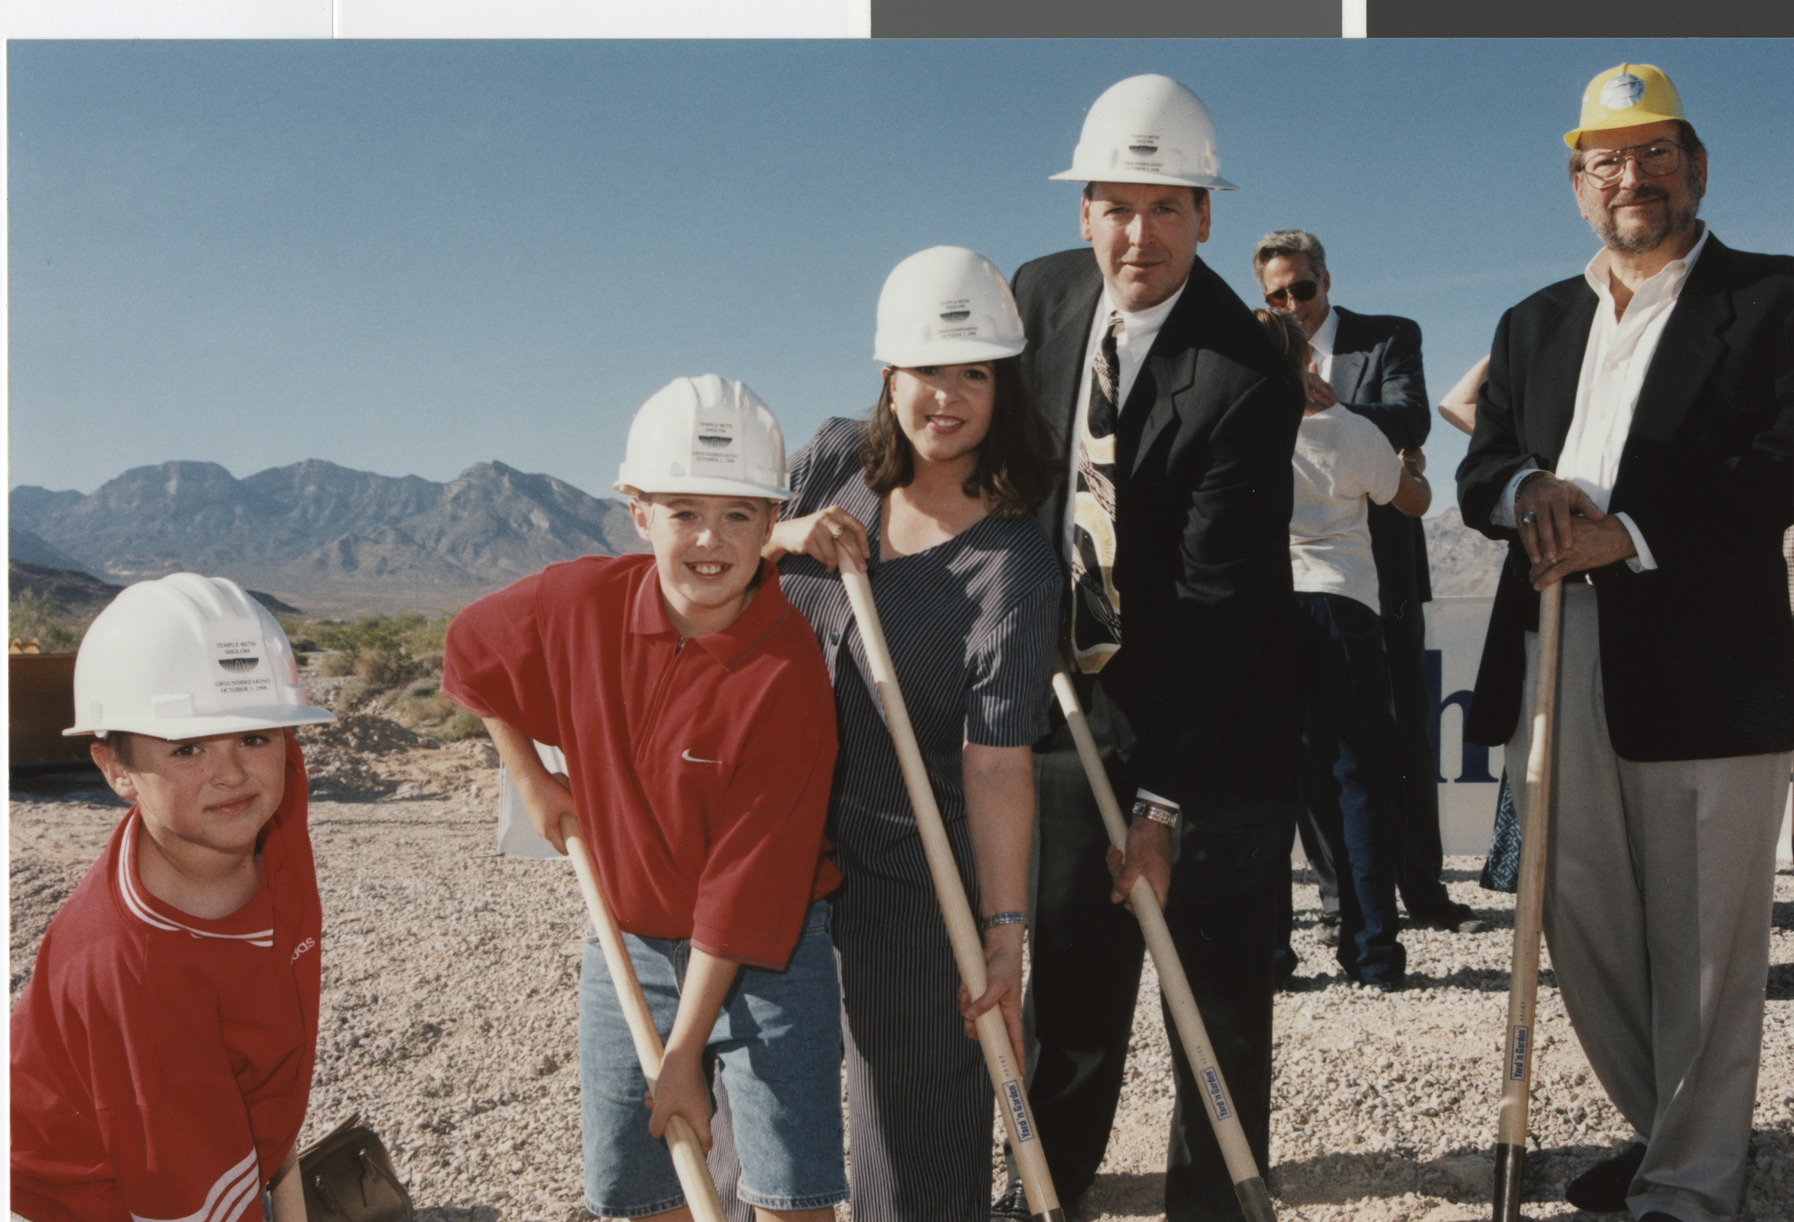 Photograph of ground breaking of Temple Beth Sholom, 1999